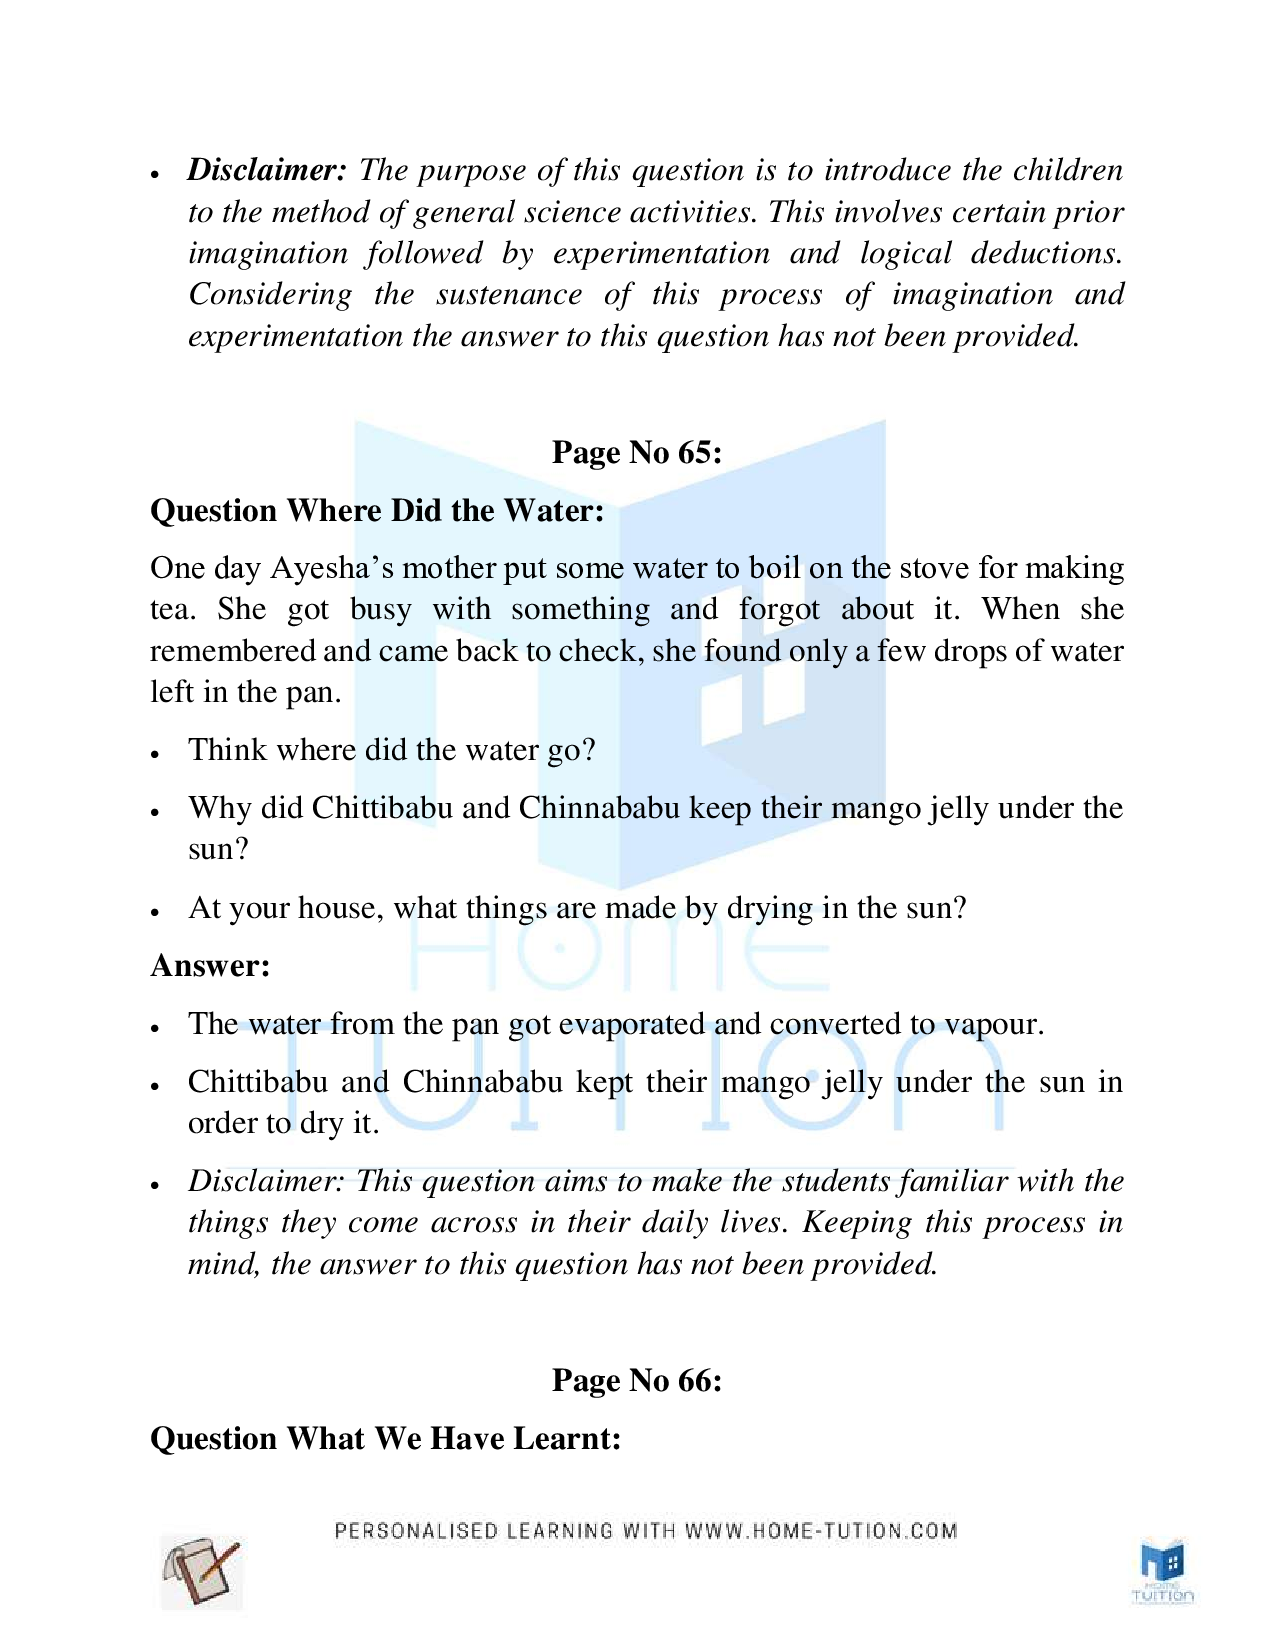 NCERT Class 5 EVS Chapter 7 Experiments with Water